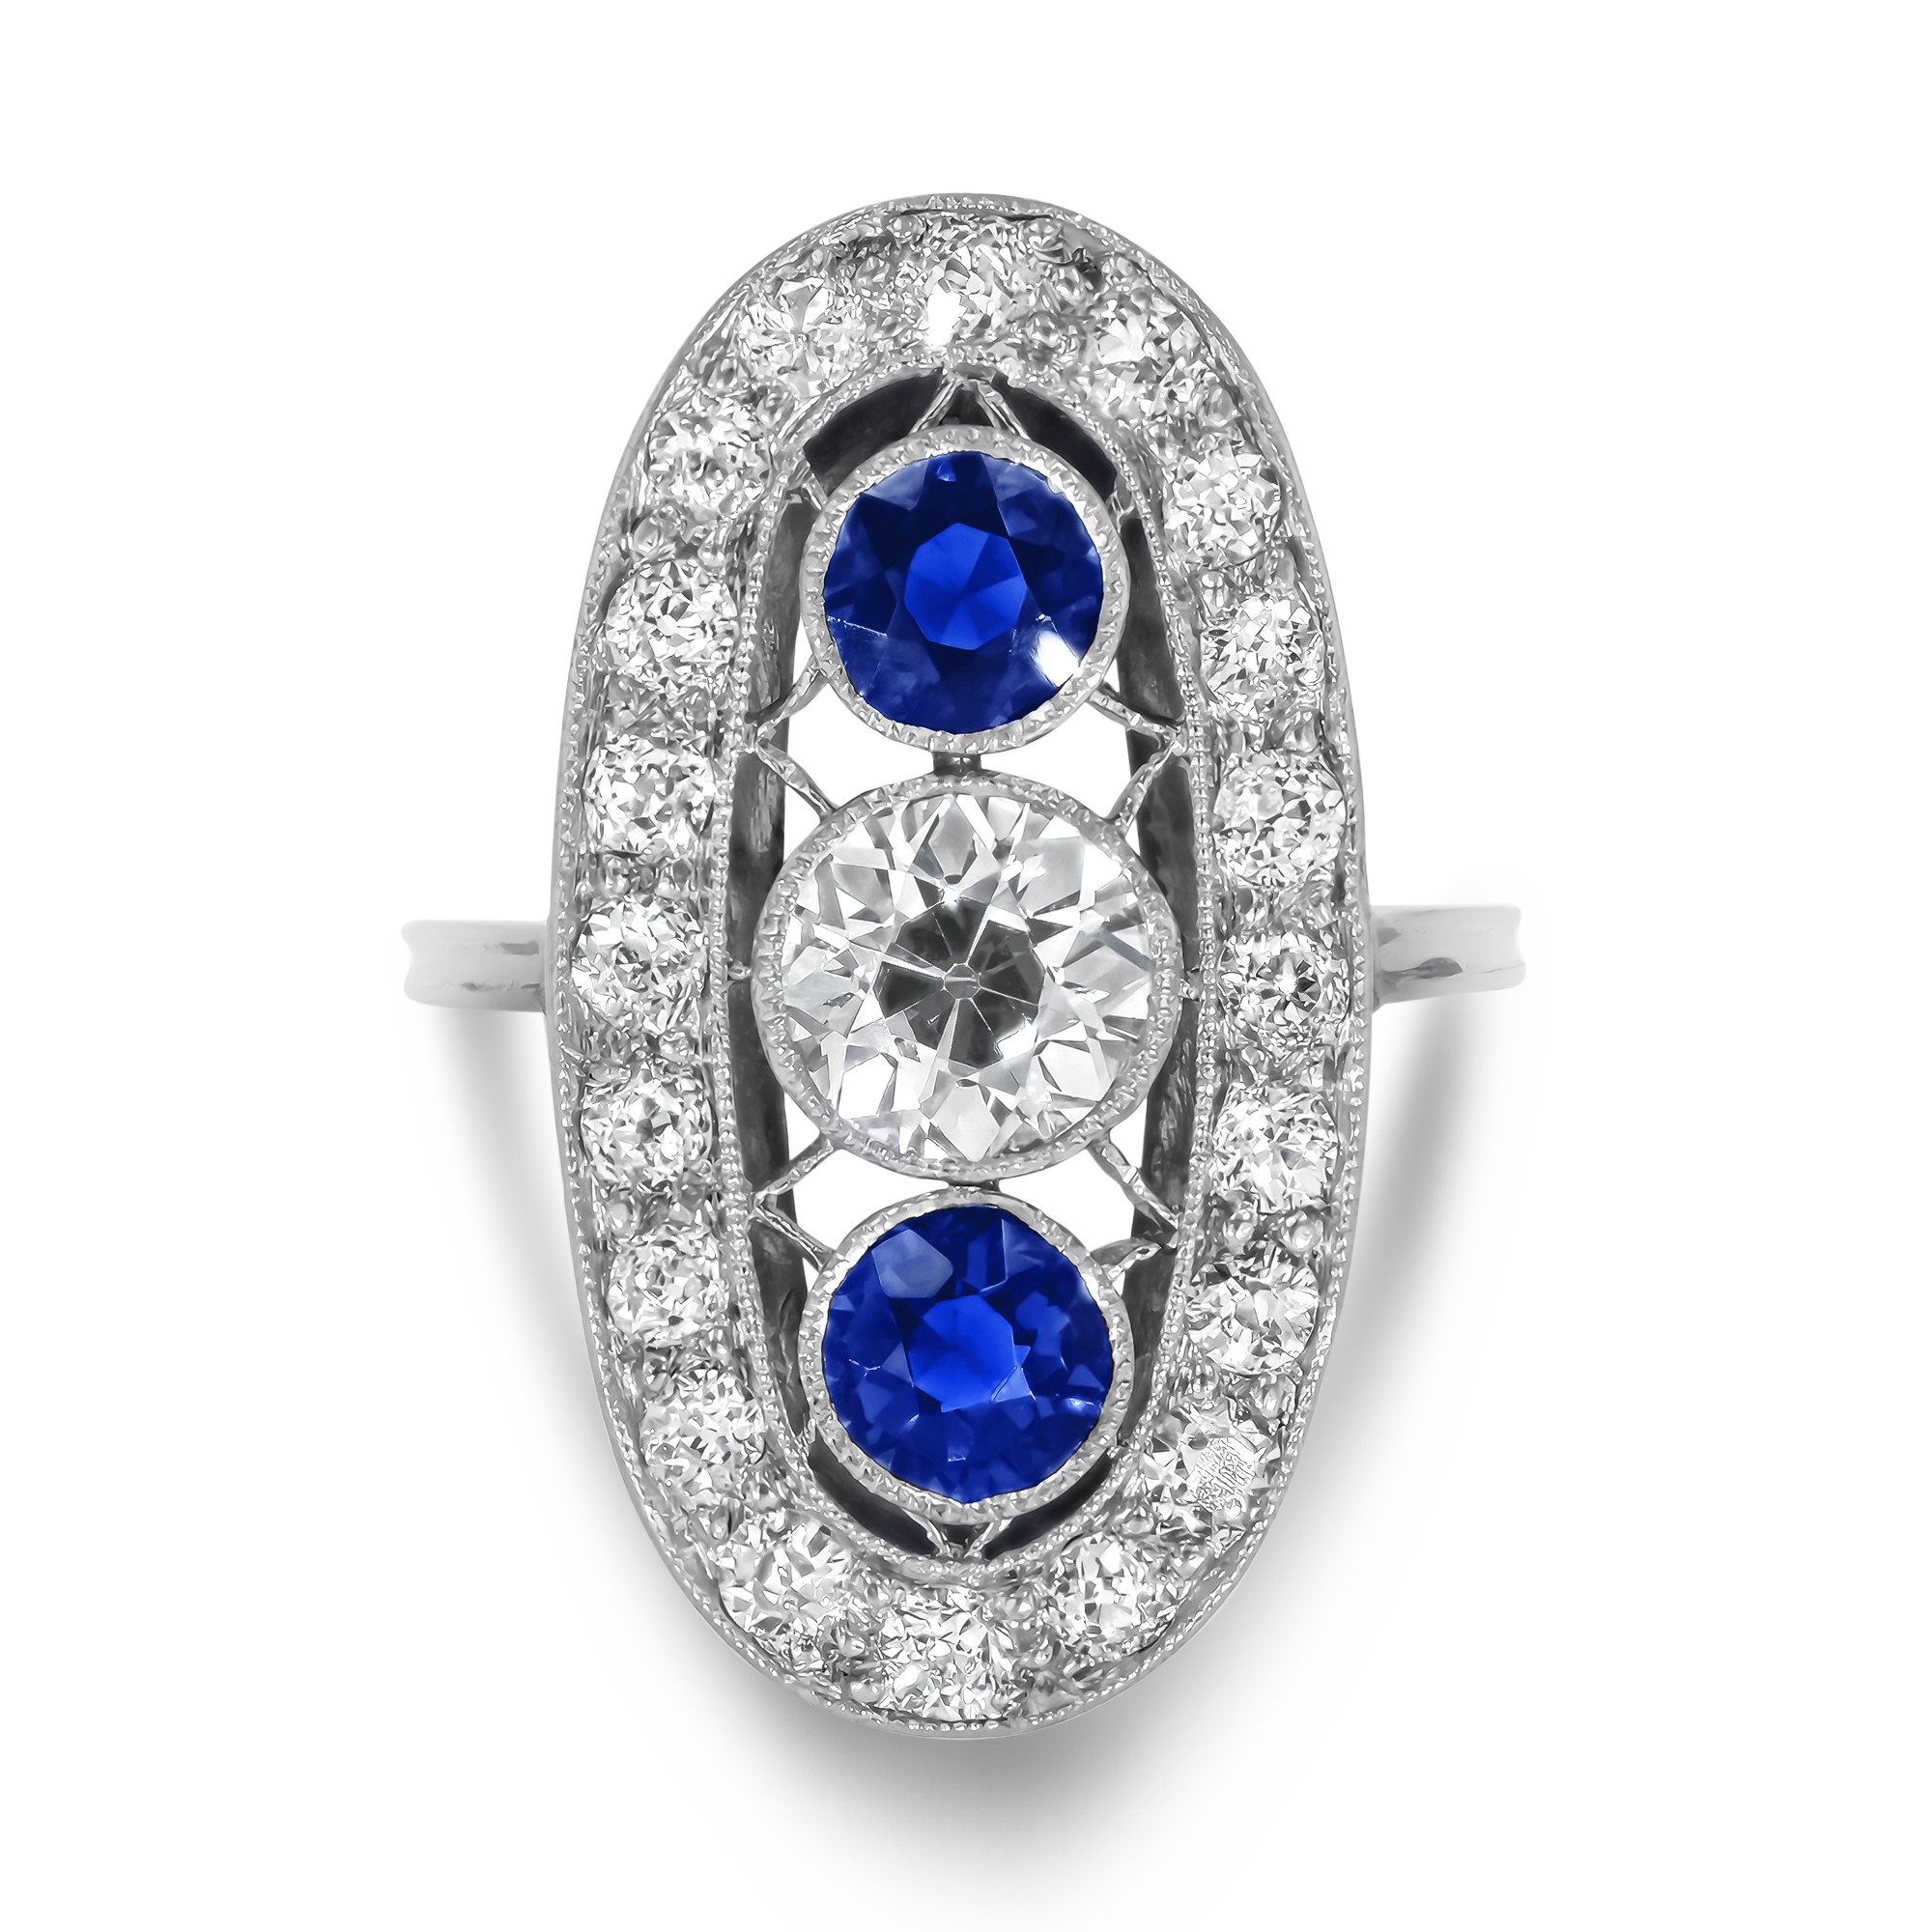 Edwardian Inspired Sapphire and Diamond Cluster Ring with Diamond Surround Brilliant Cut, Millegrain Set_2